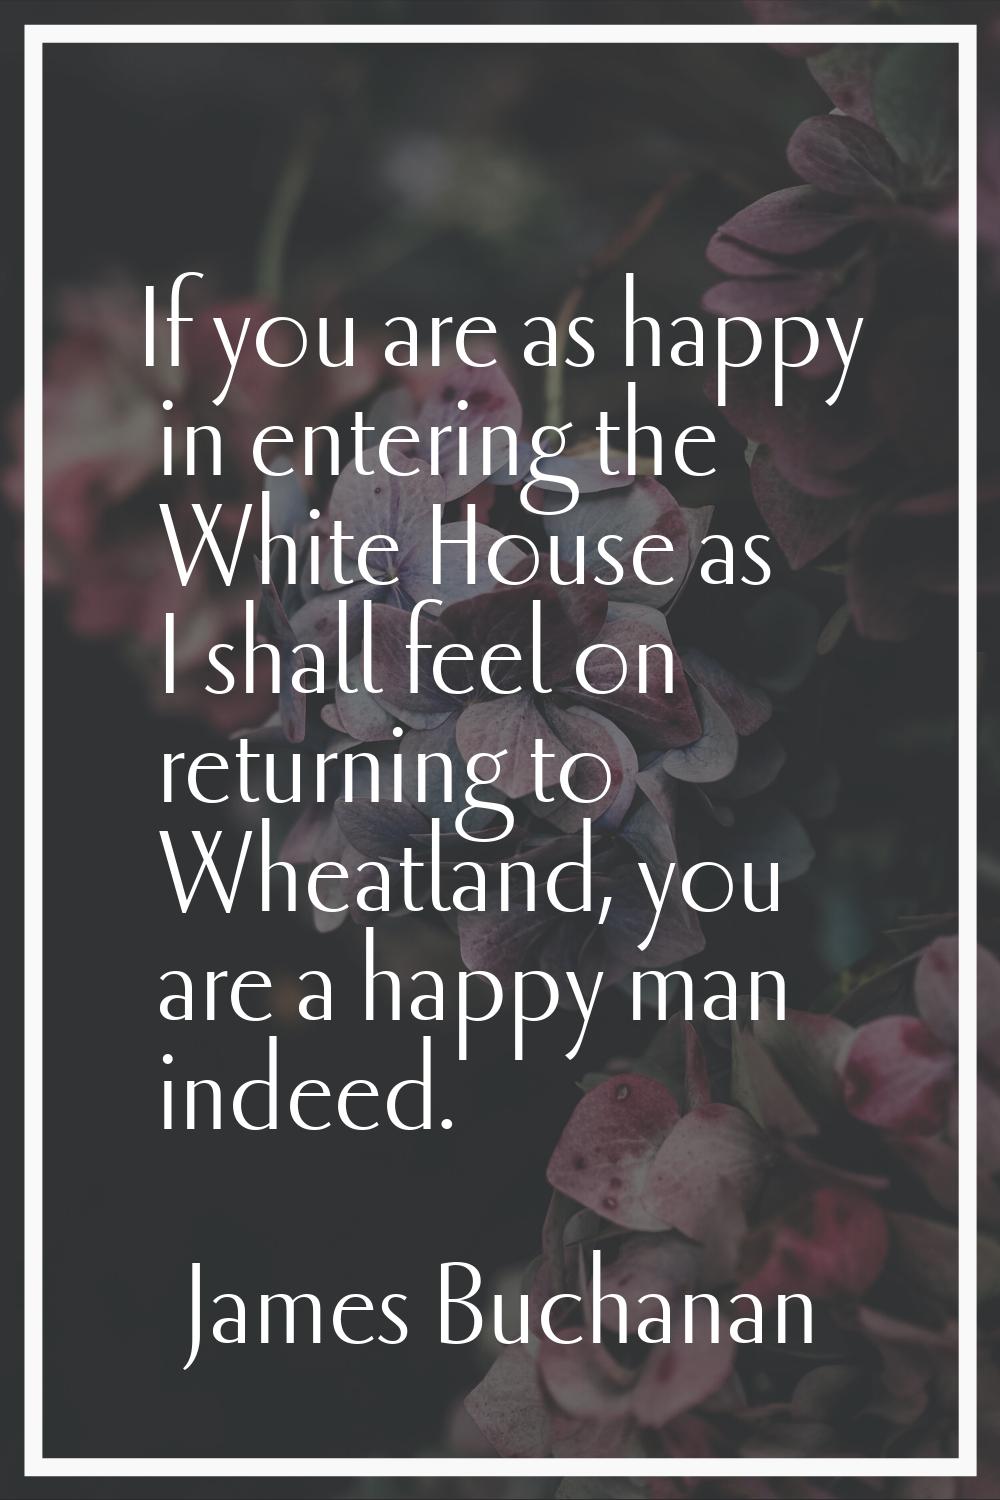 If you are as happy in entering the White House as I shall feel on returning to Wheatland, you are 